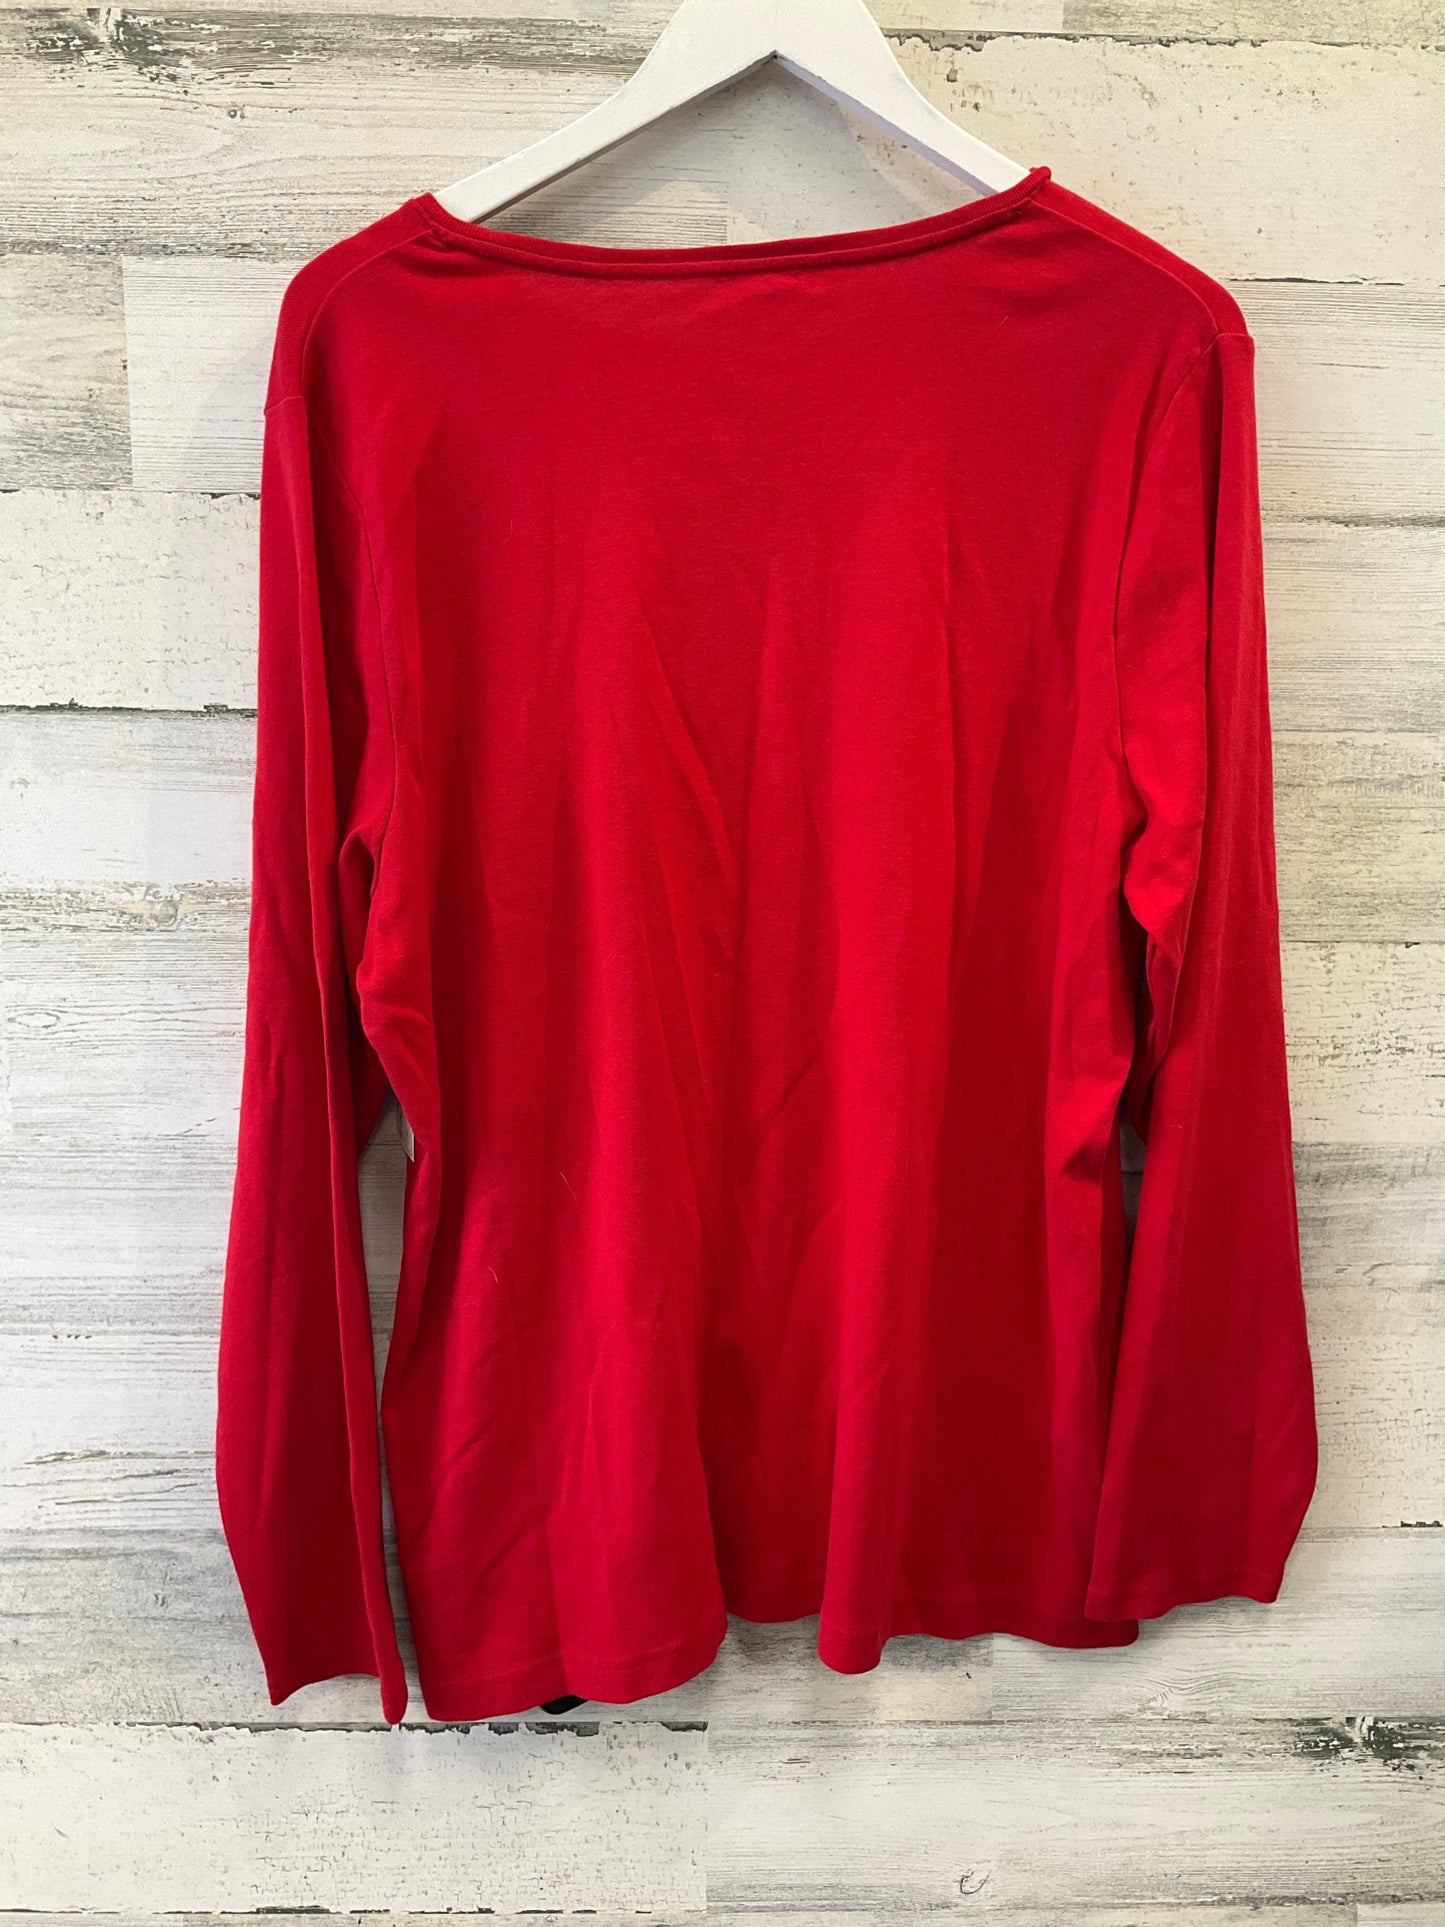 Red Top Long Sleeve Basic Croft And Barrow, Size 1x